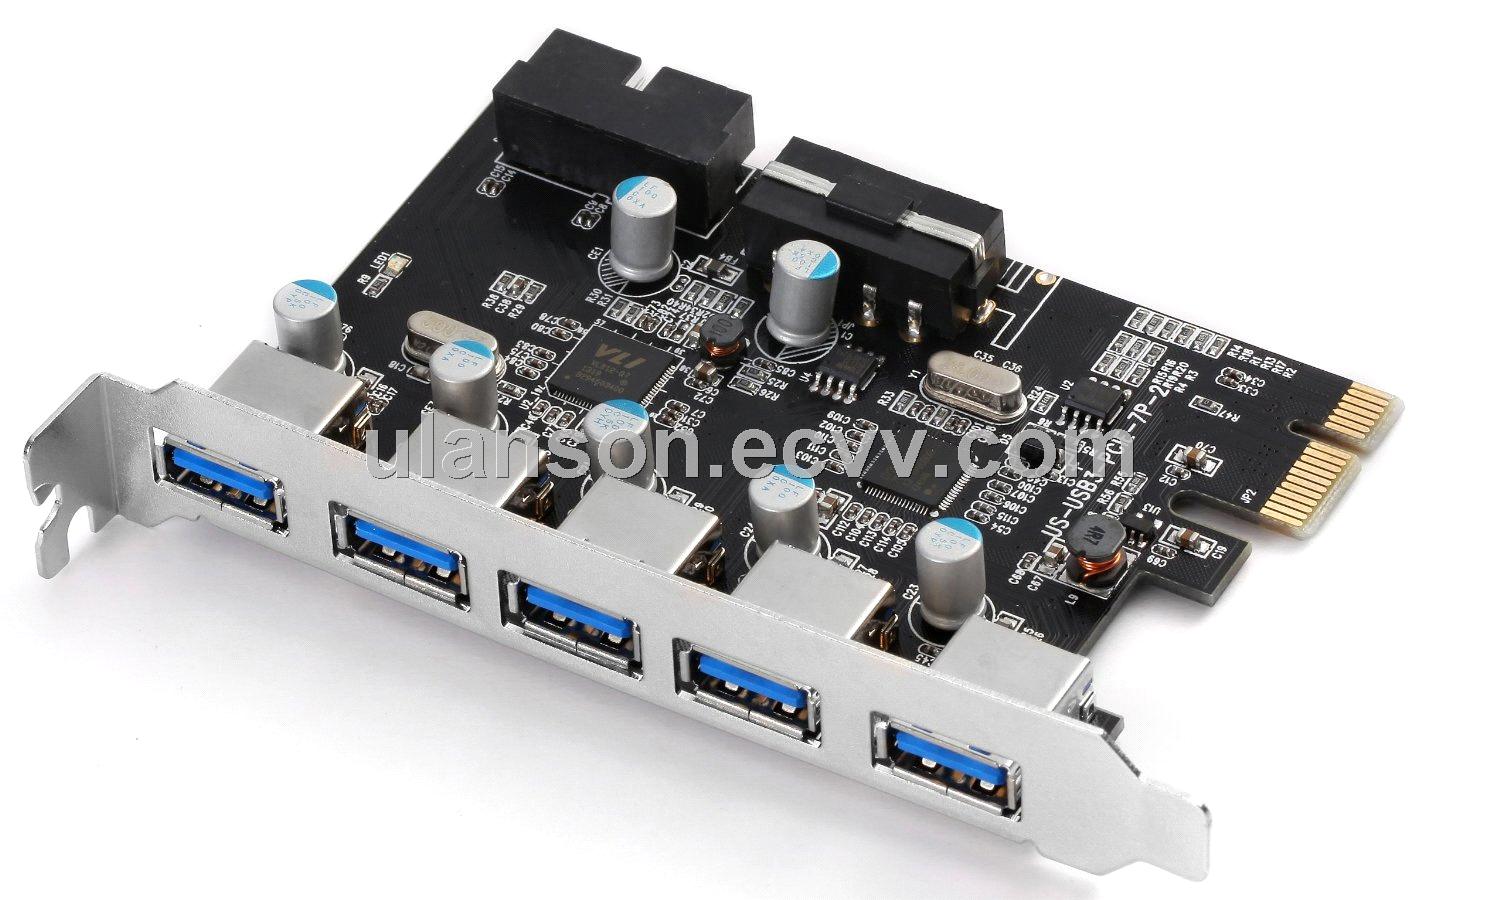 Fast 7 Port PCI-E PCI Express to USB 3.0 Connector Expansion Card Board Adapter